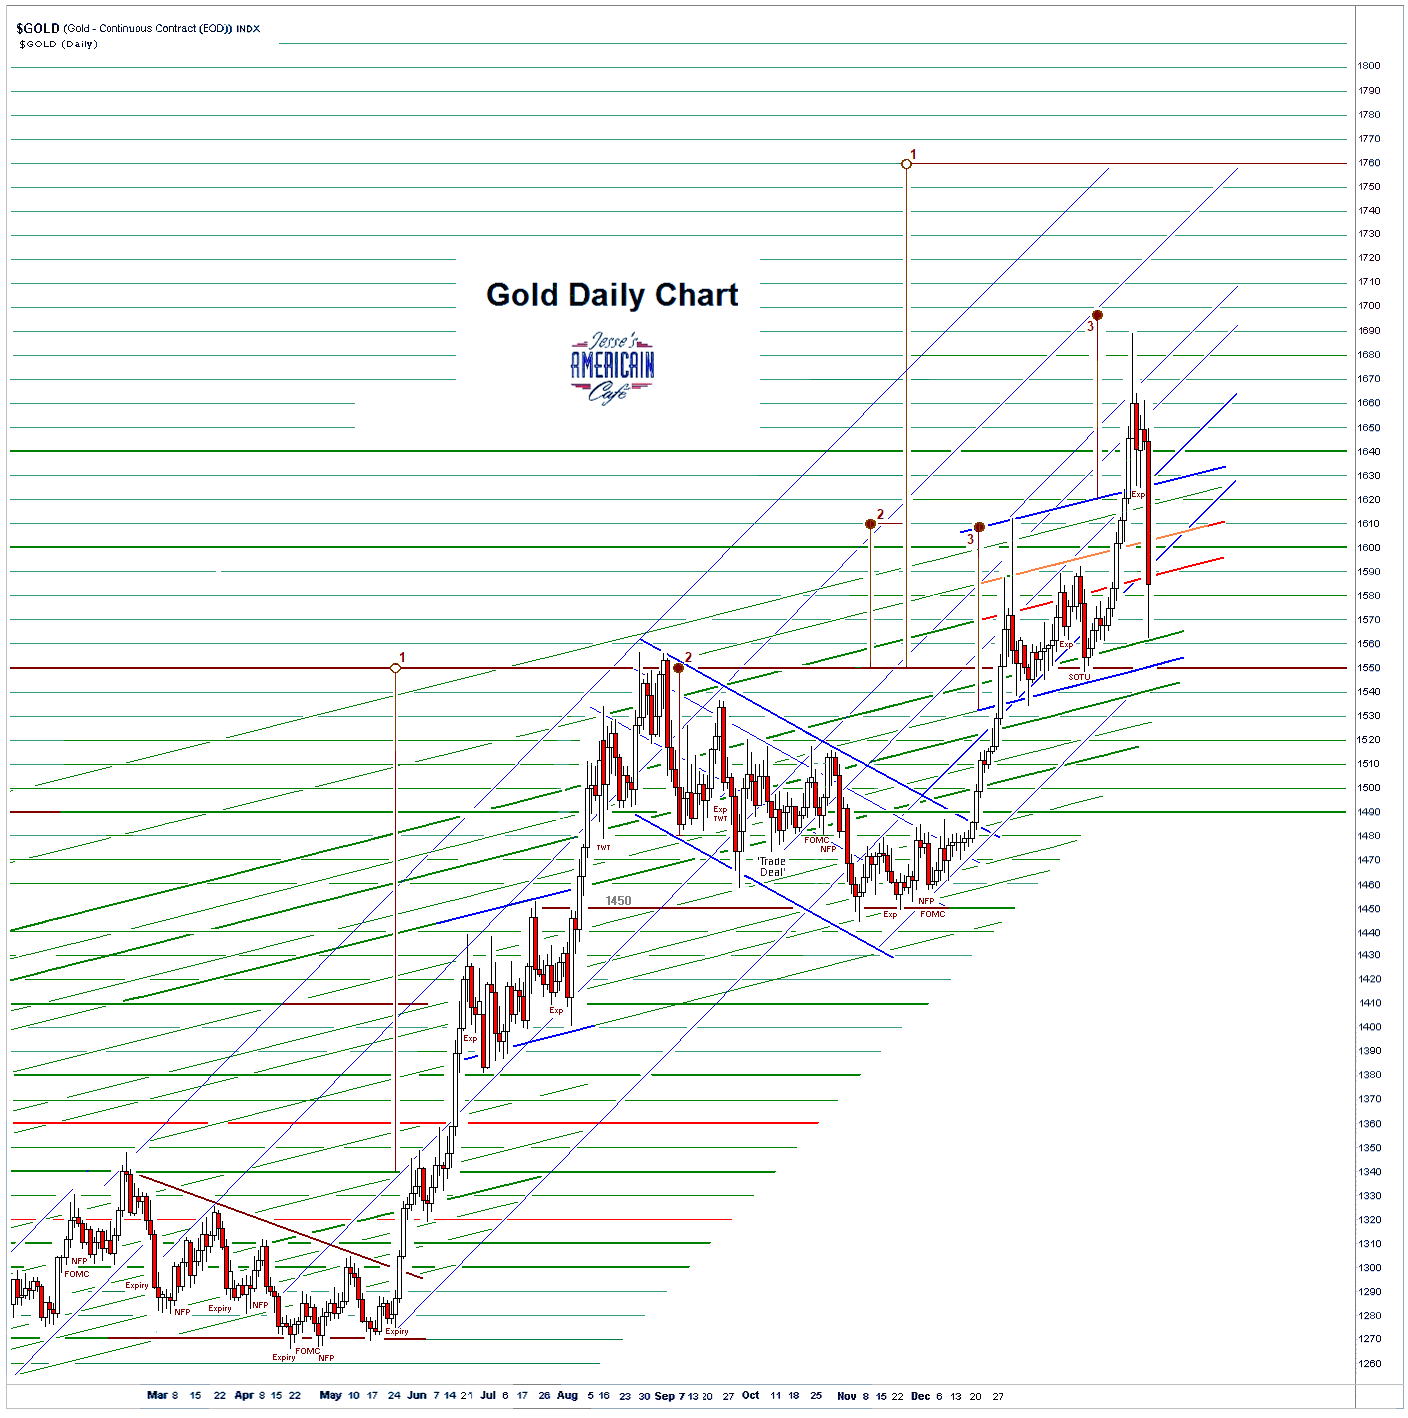 golddaily8 29-02-2020.PNG